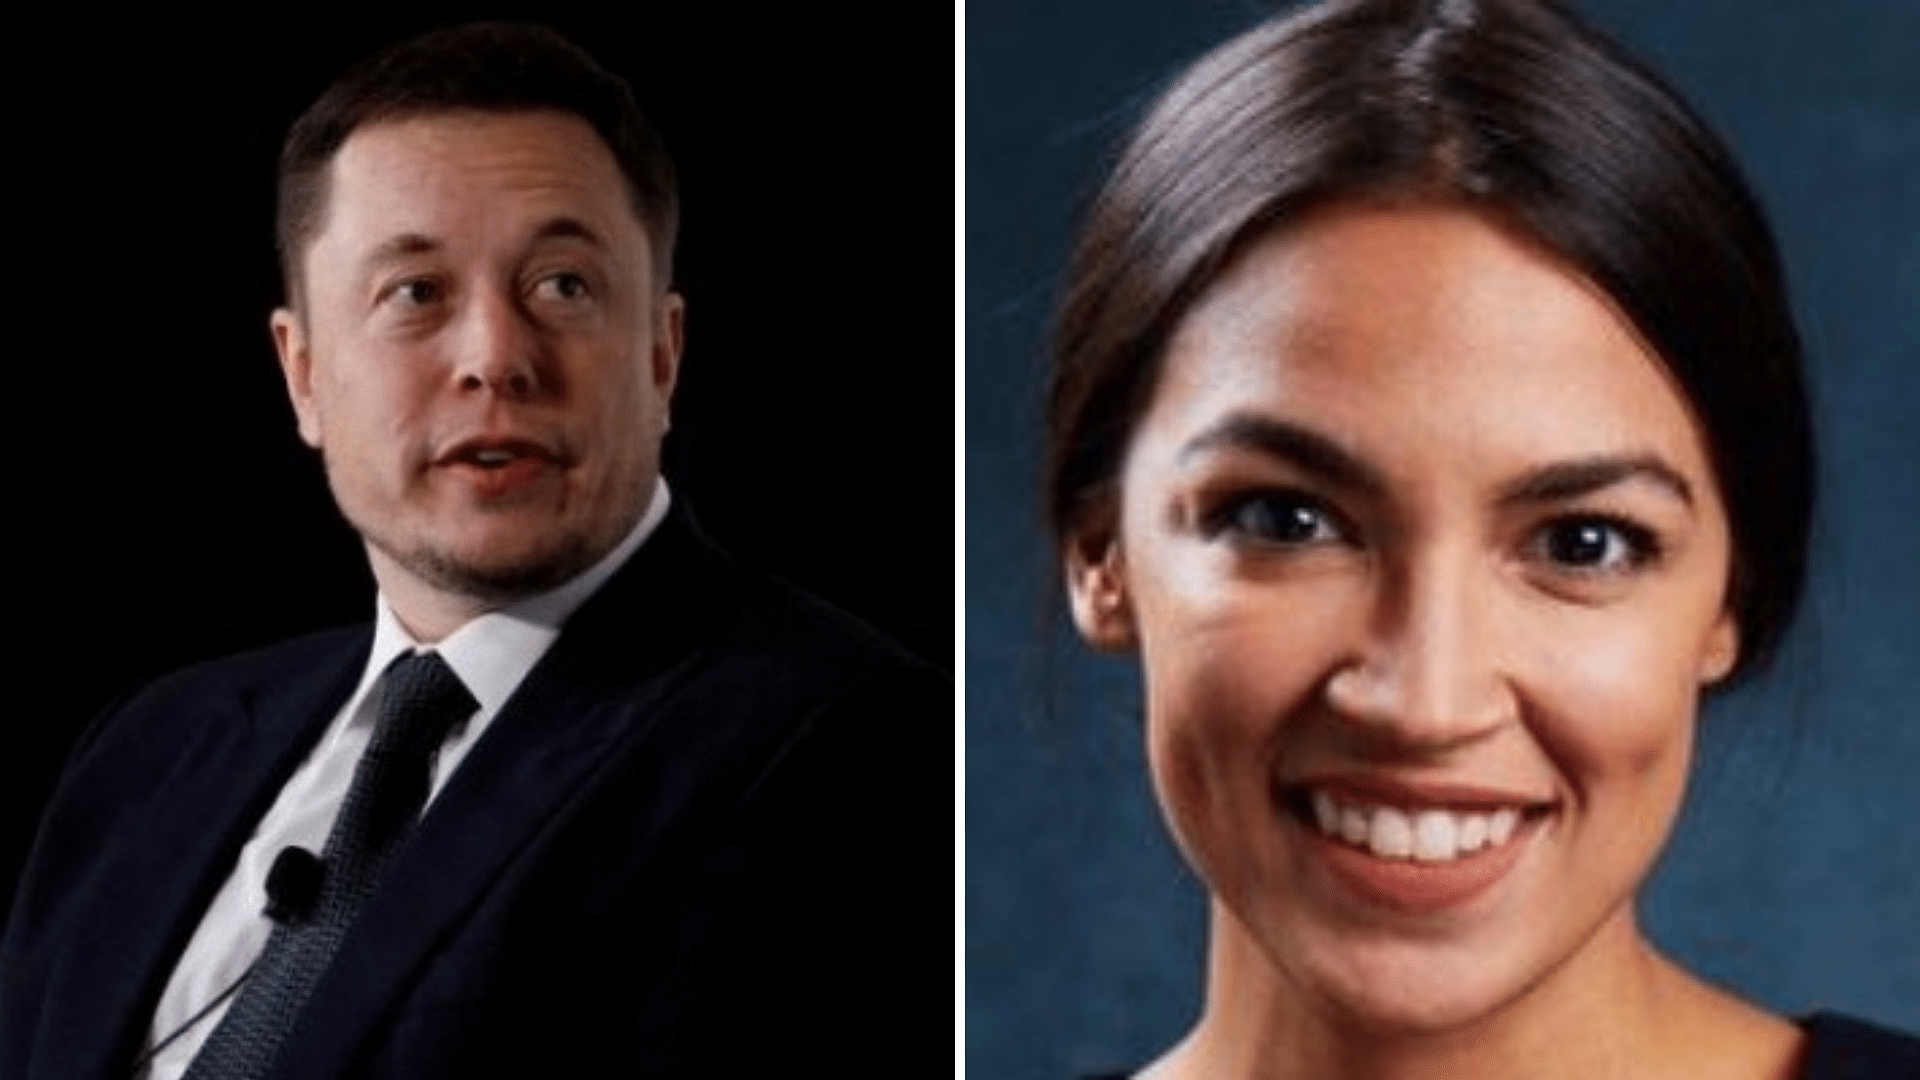 <div class="paragraphs"><p>SpaceX and Tesla CEO Elon Musk, who acquired Twitter, earlier this week for $44 billion, on Friday, 29 April, engaged in a Twitter spat with US representative Alexandria Ocasio-Cortez, after she indirectly critiqued his tweet that said Democratic Party "has been hijacked by extremists".</p></div>